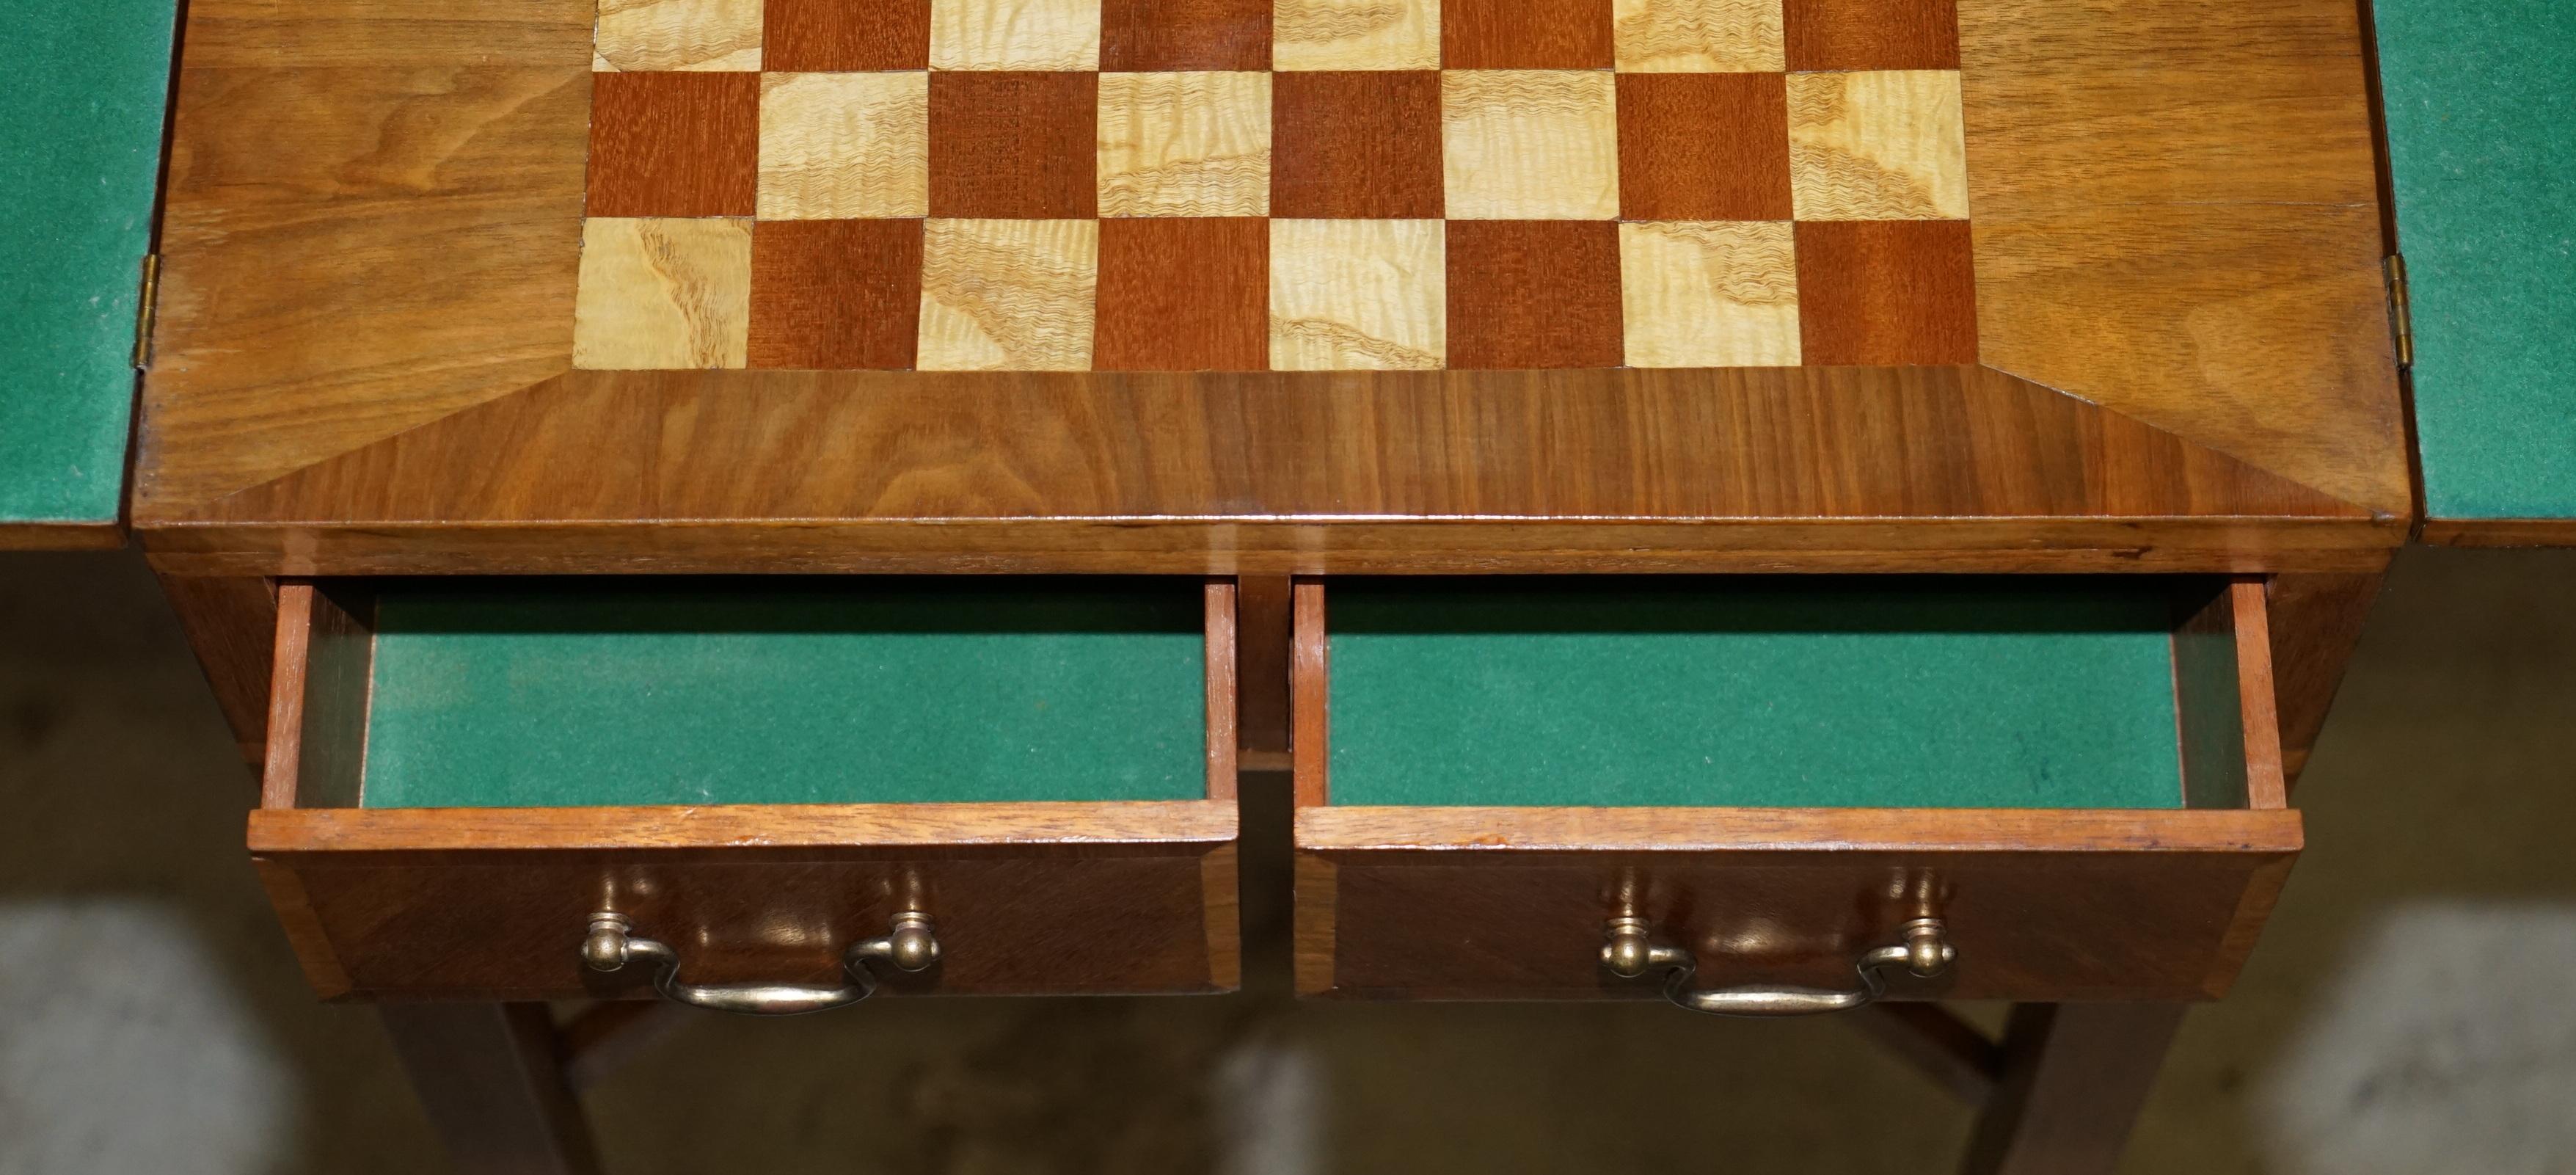 Vintage Walnut Satinwood Games Card Side Table, Fold Out Chess Board & Drawers For Sale 11